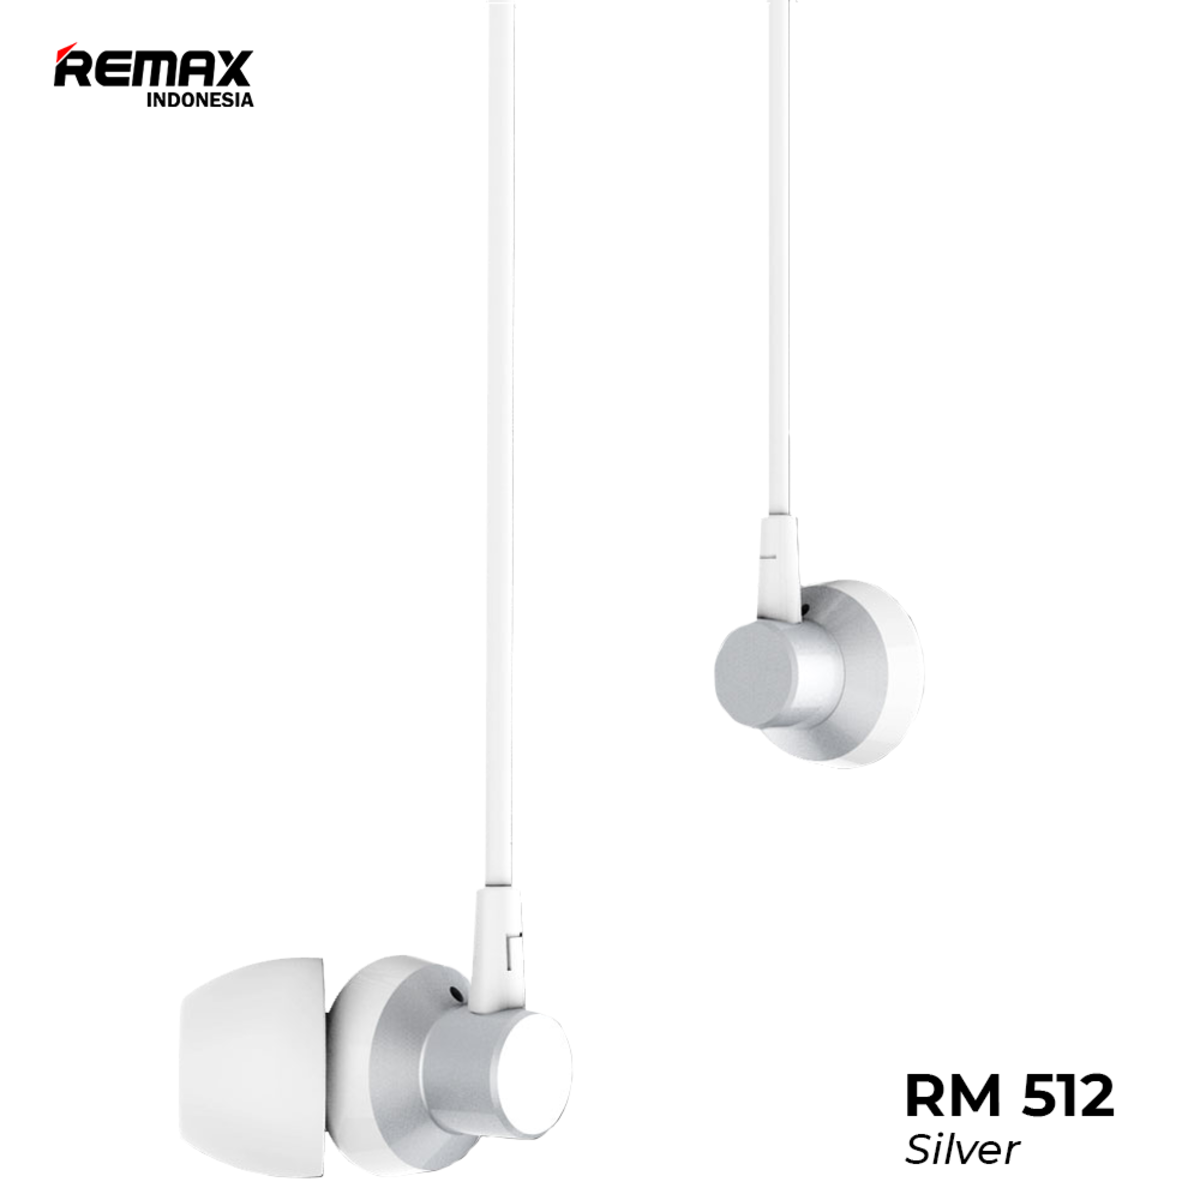 Remax WiredHeadset RM-512 Silver